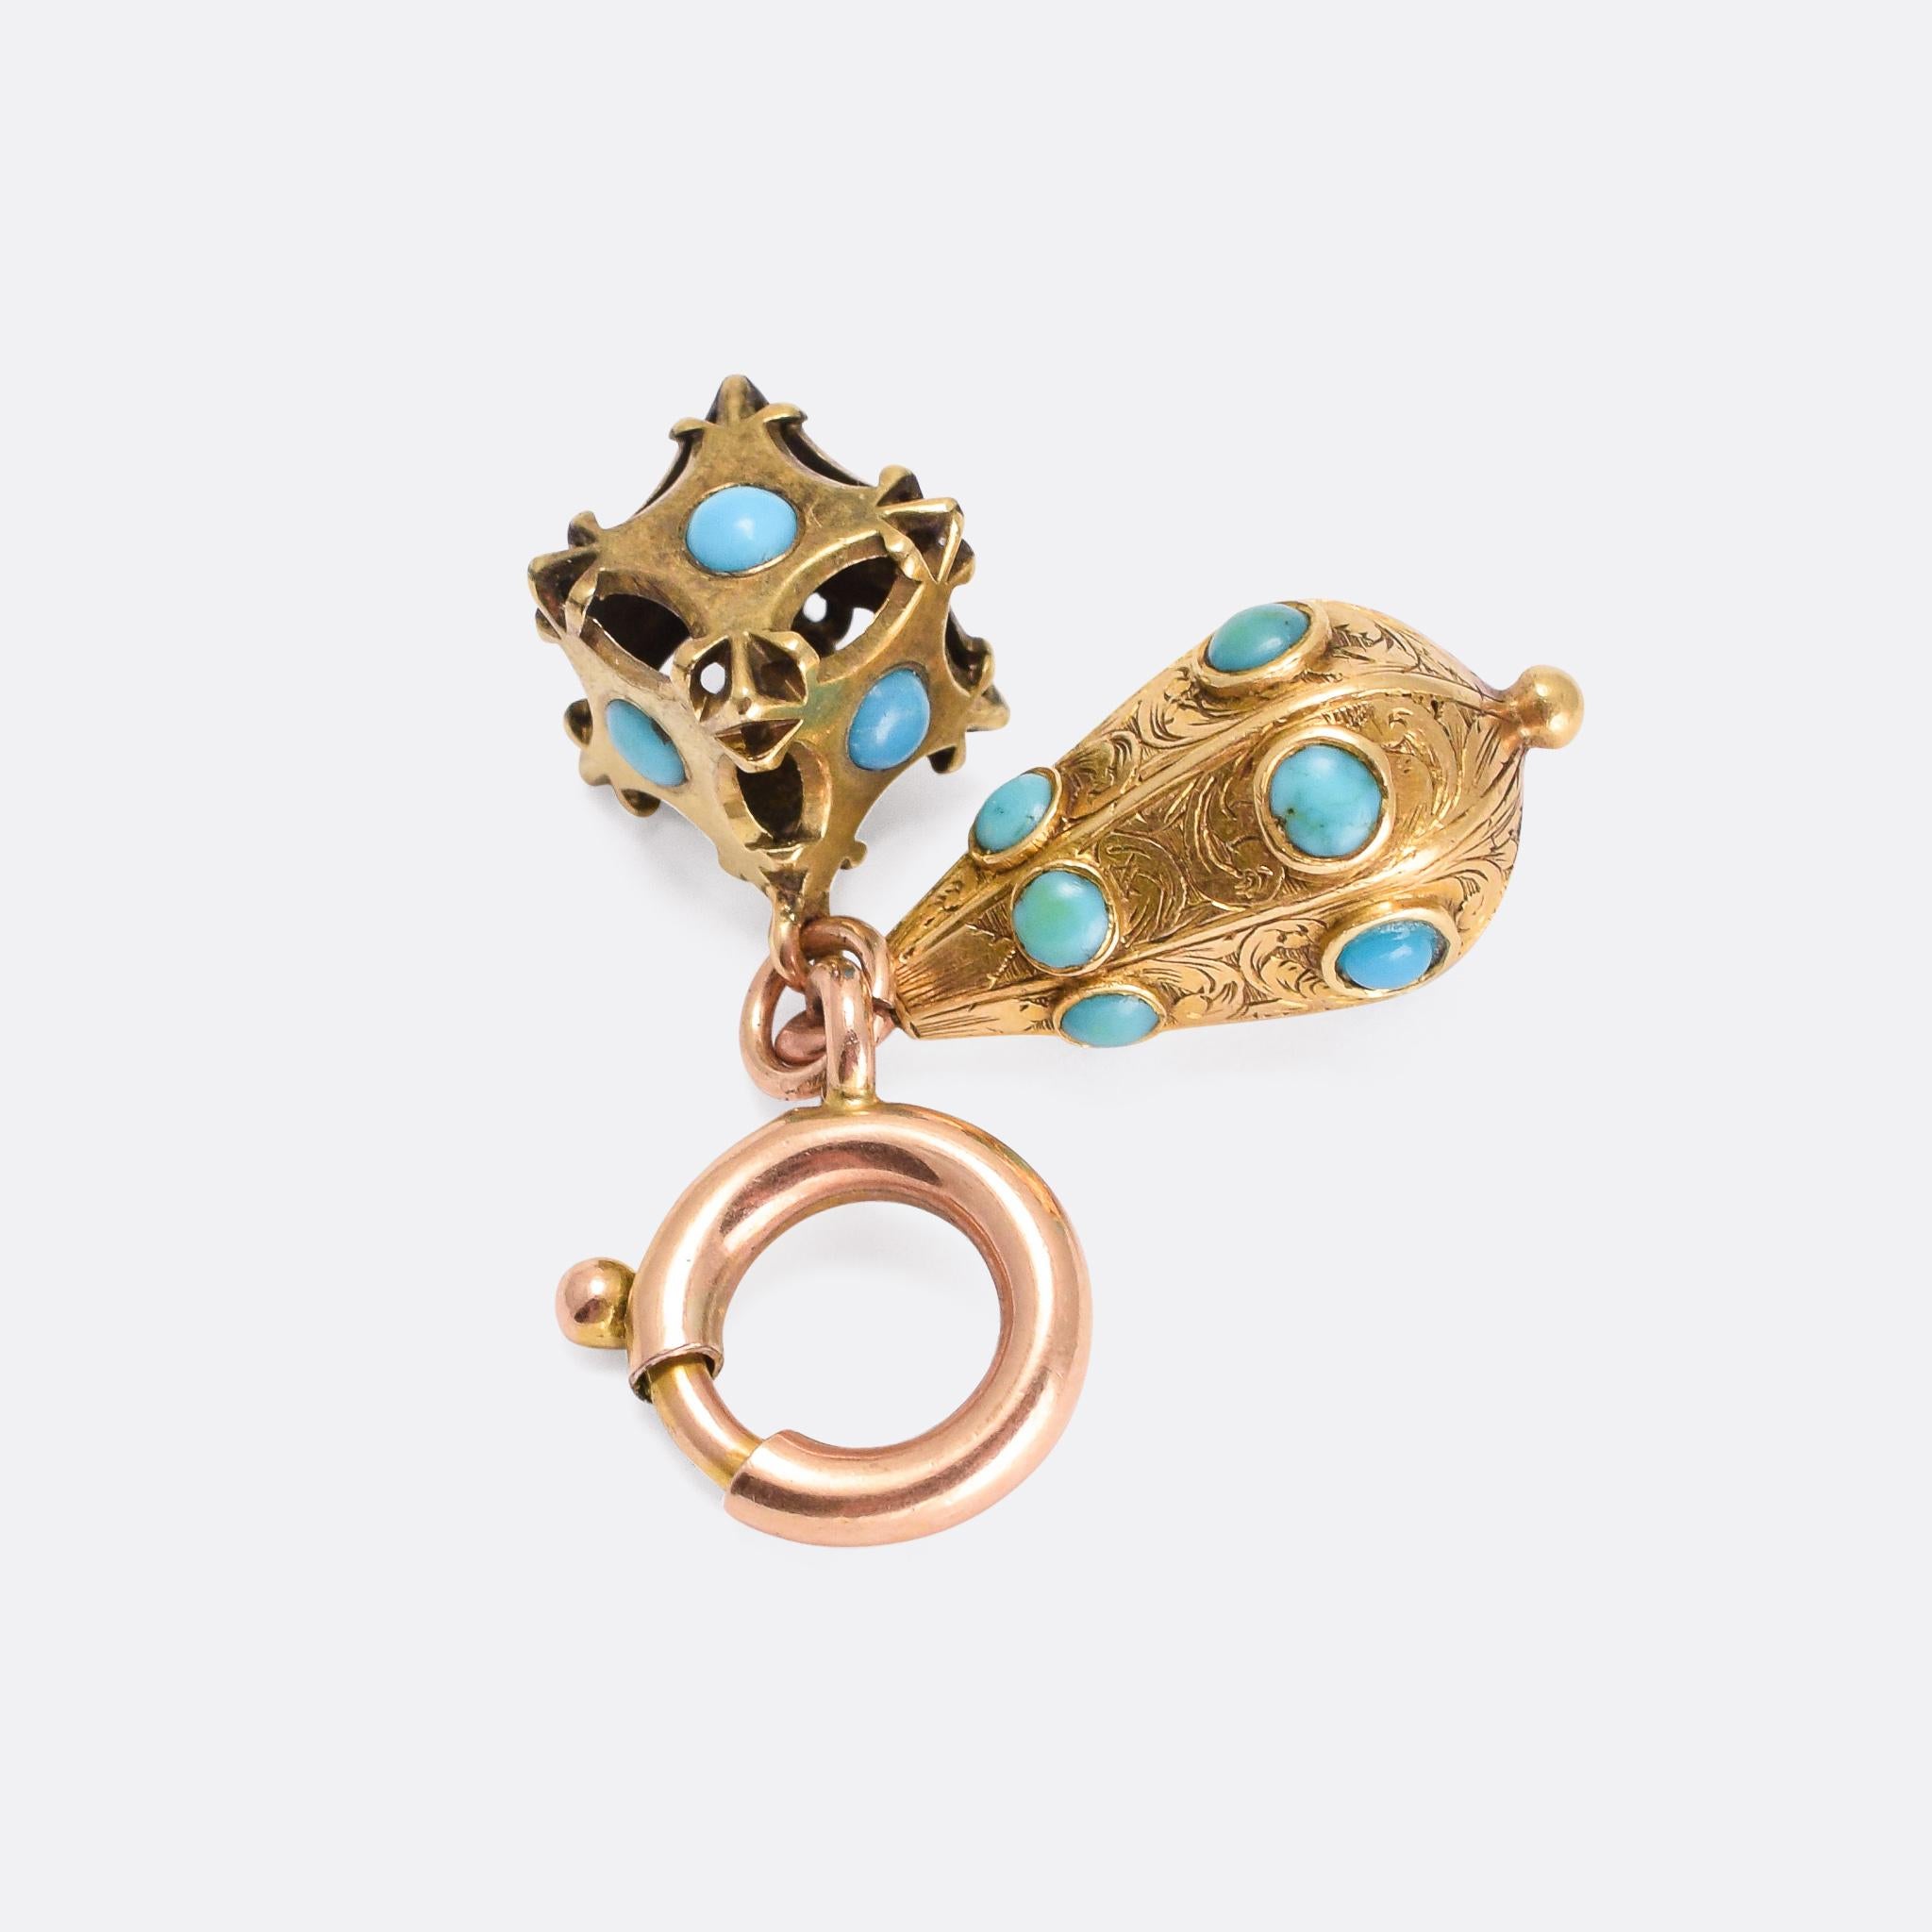 A 15k gold ring-bolt clasp paired with two early Victorian turquoise-set charms: one is an openworked cube, the other is pear shaped and features hand-chased detailing. Modelled in 15 karat gold throughout, it can be used as a charm holder or worn